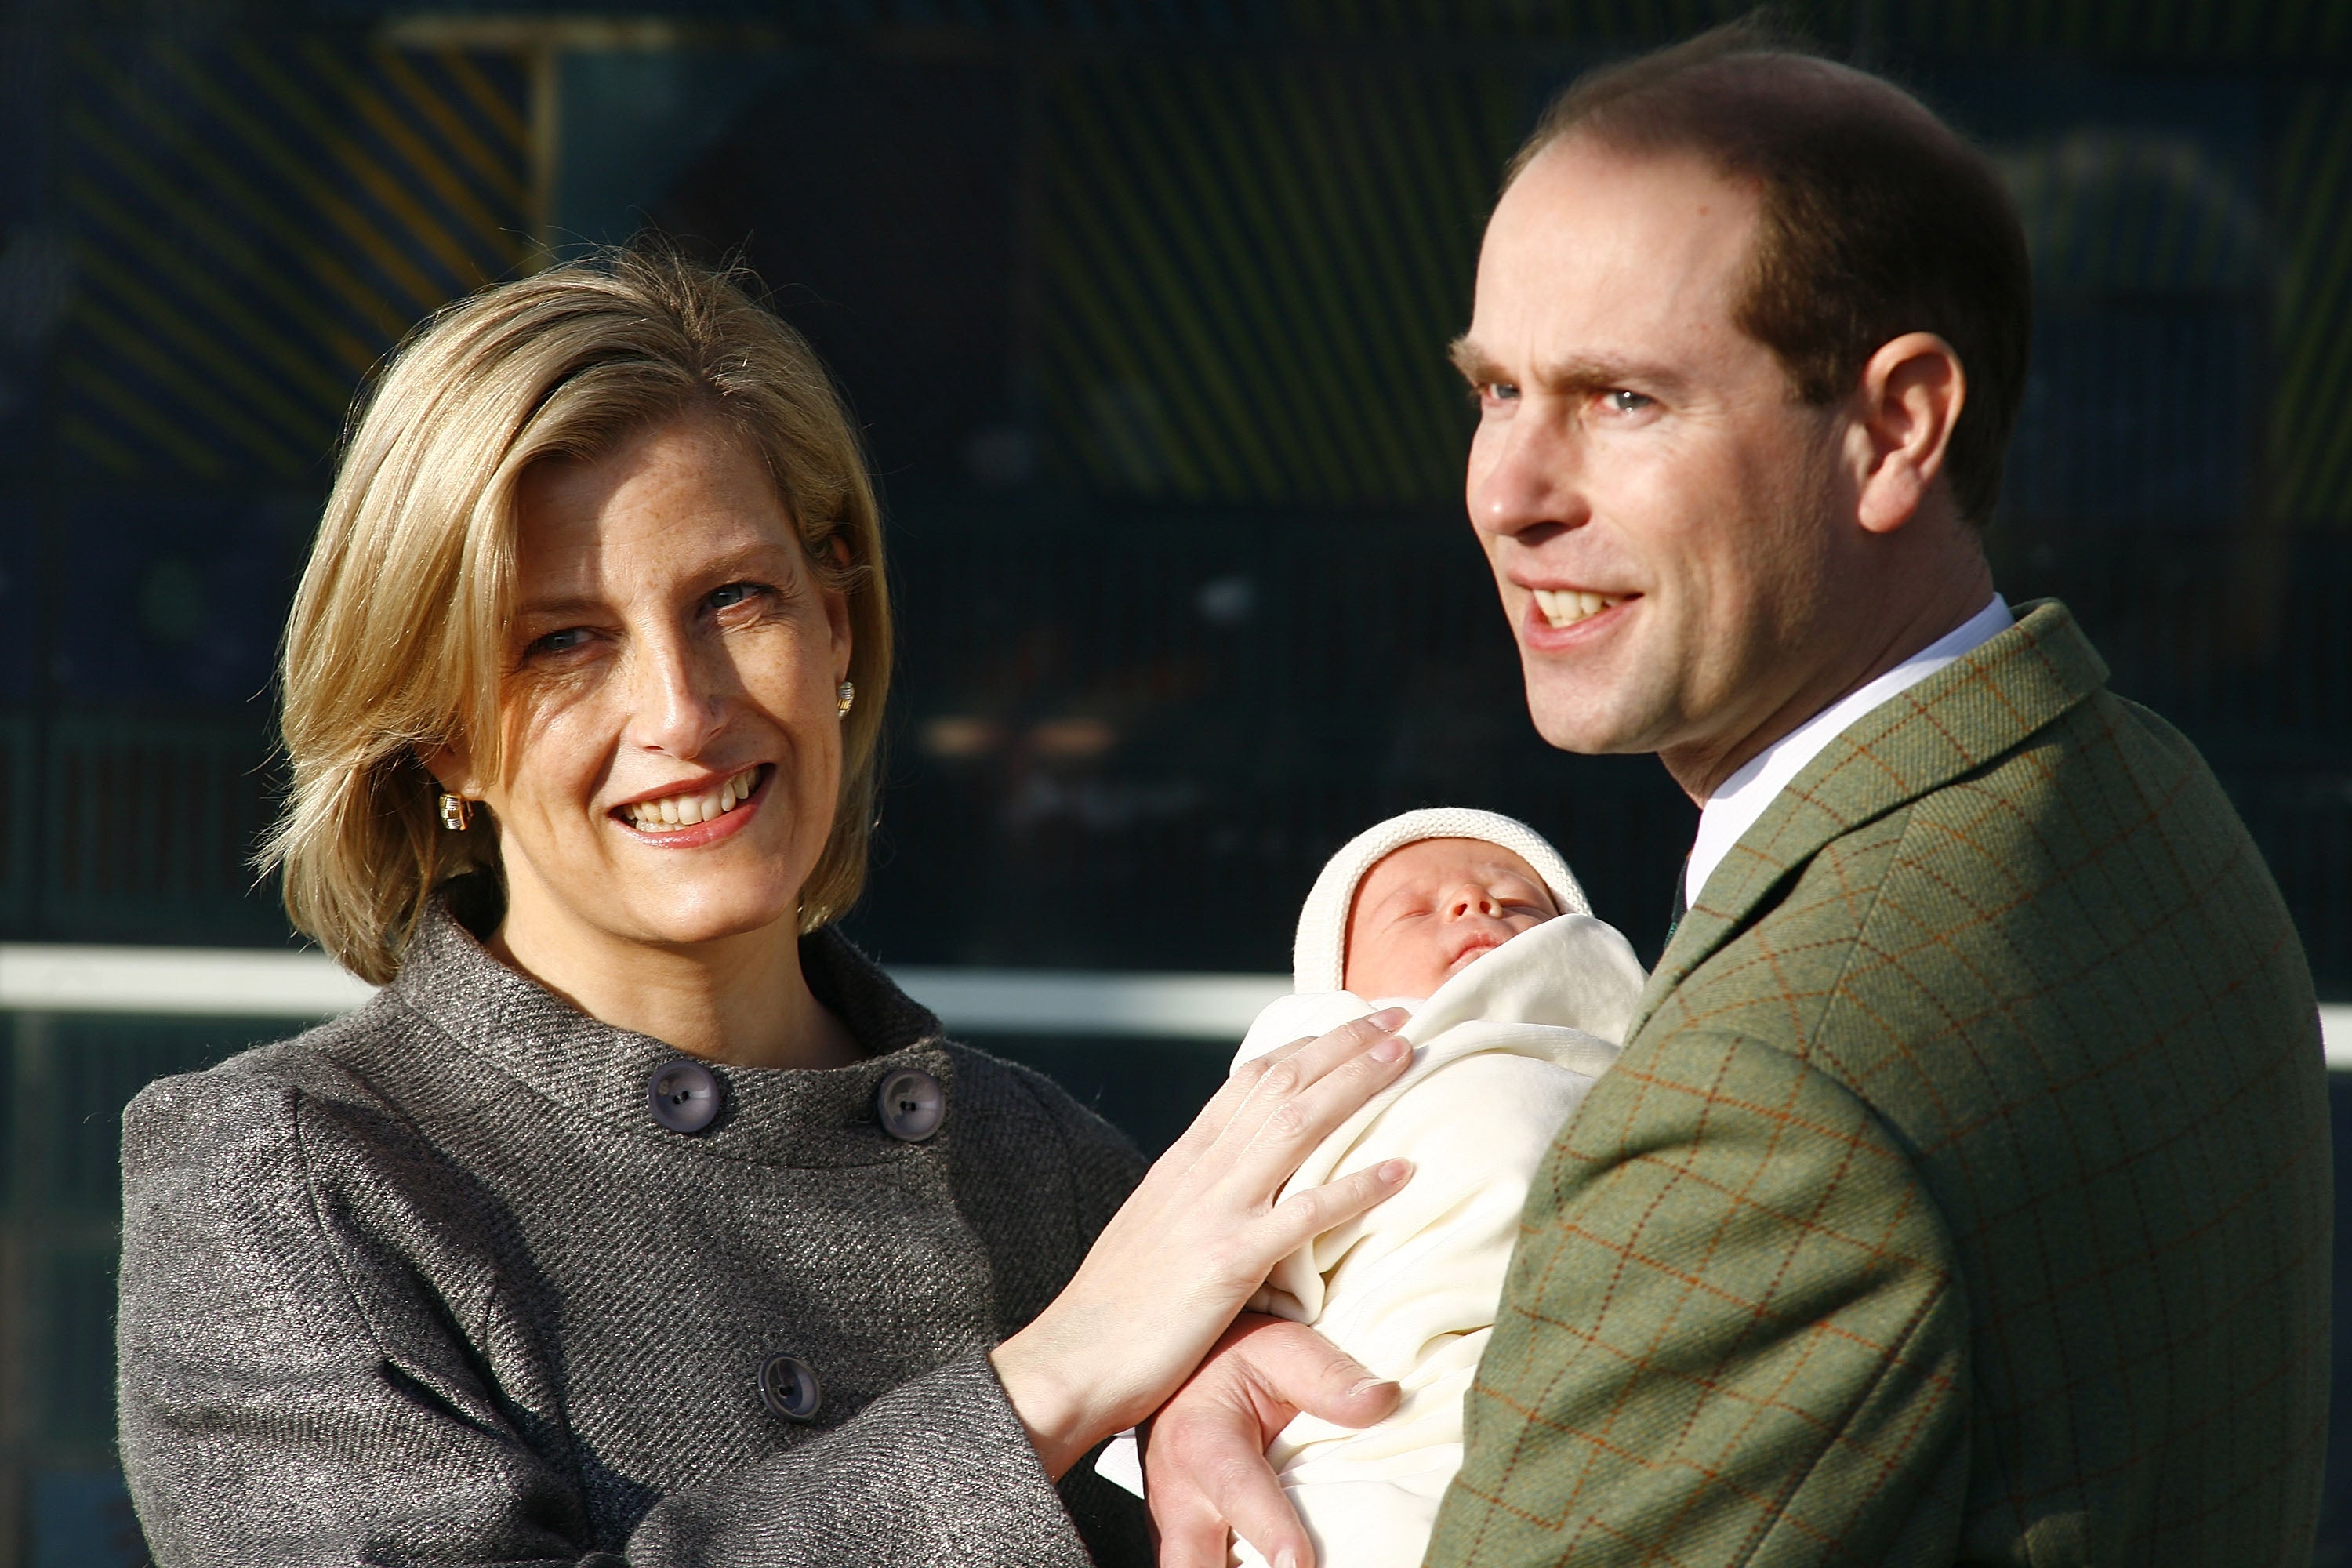 Prince Edward, Earl of Wessex and Sophie Rhys-Jones, Countess of Wessex leave Hospital with their new baby boy at Frimley Park Hospital on December 20, 2007